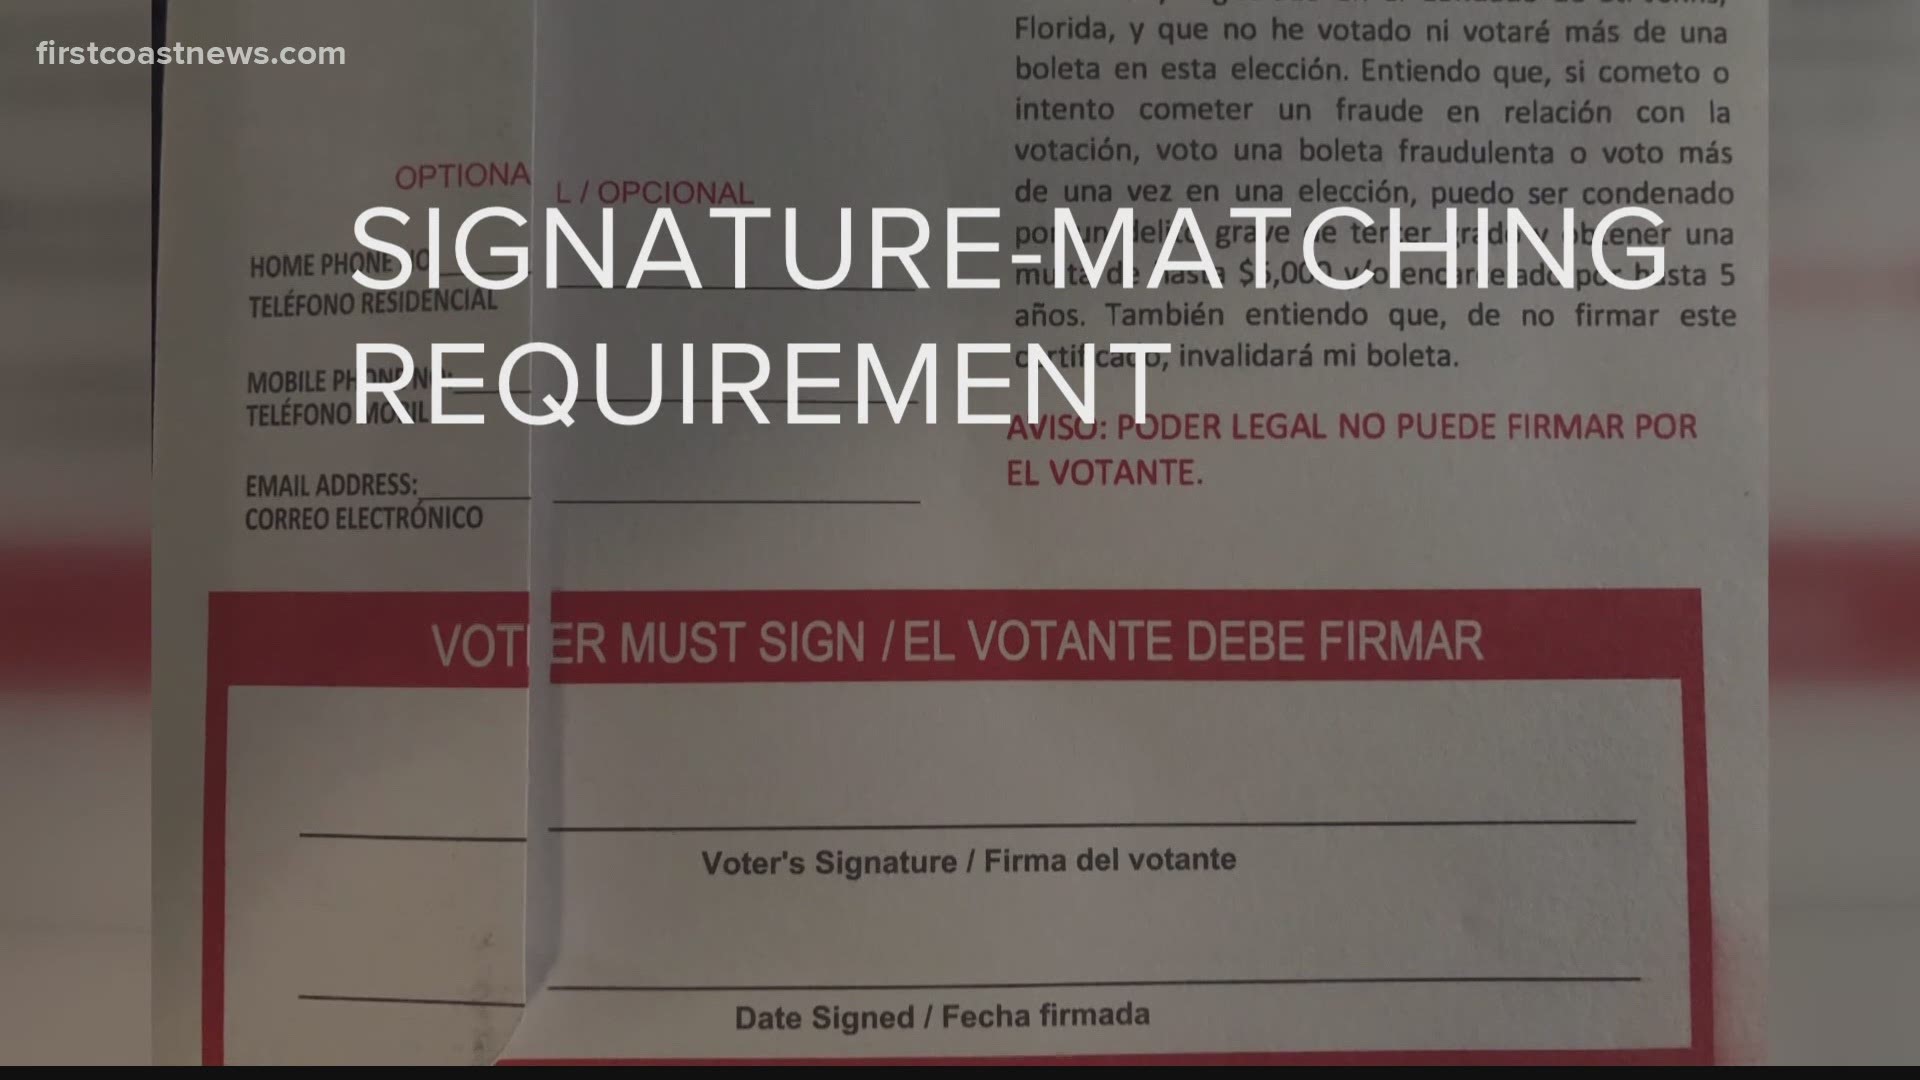 A signature matching system would be required.